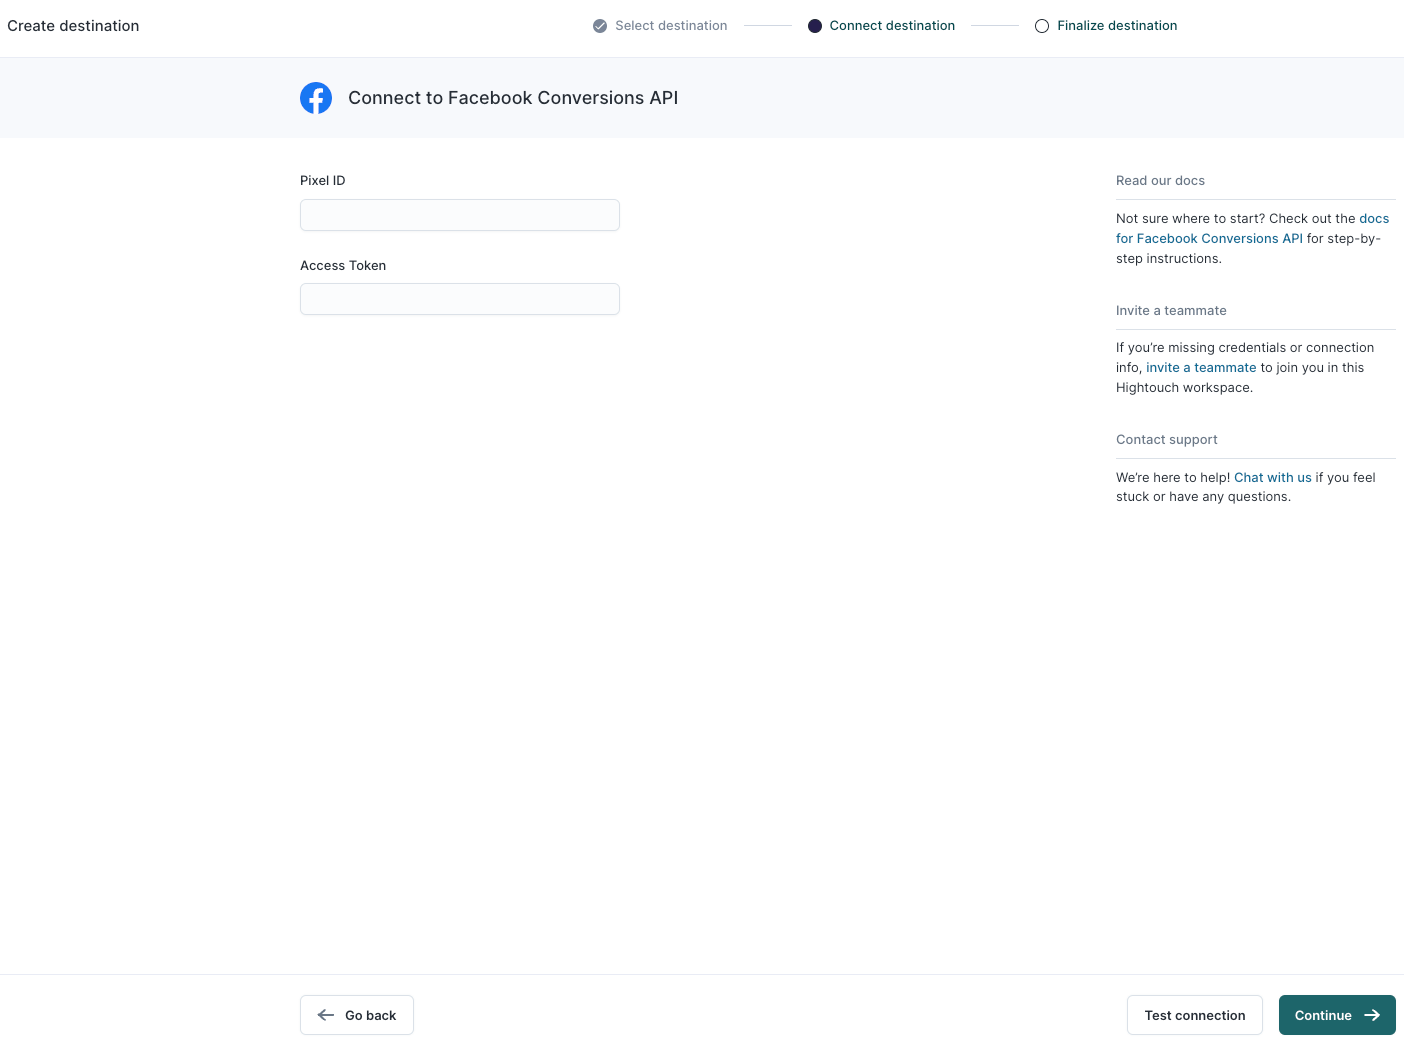 Entering Pixel ID and access token to se up Facebook CAPI in Hightouch